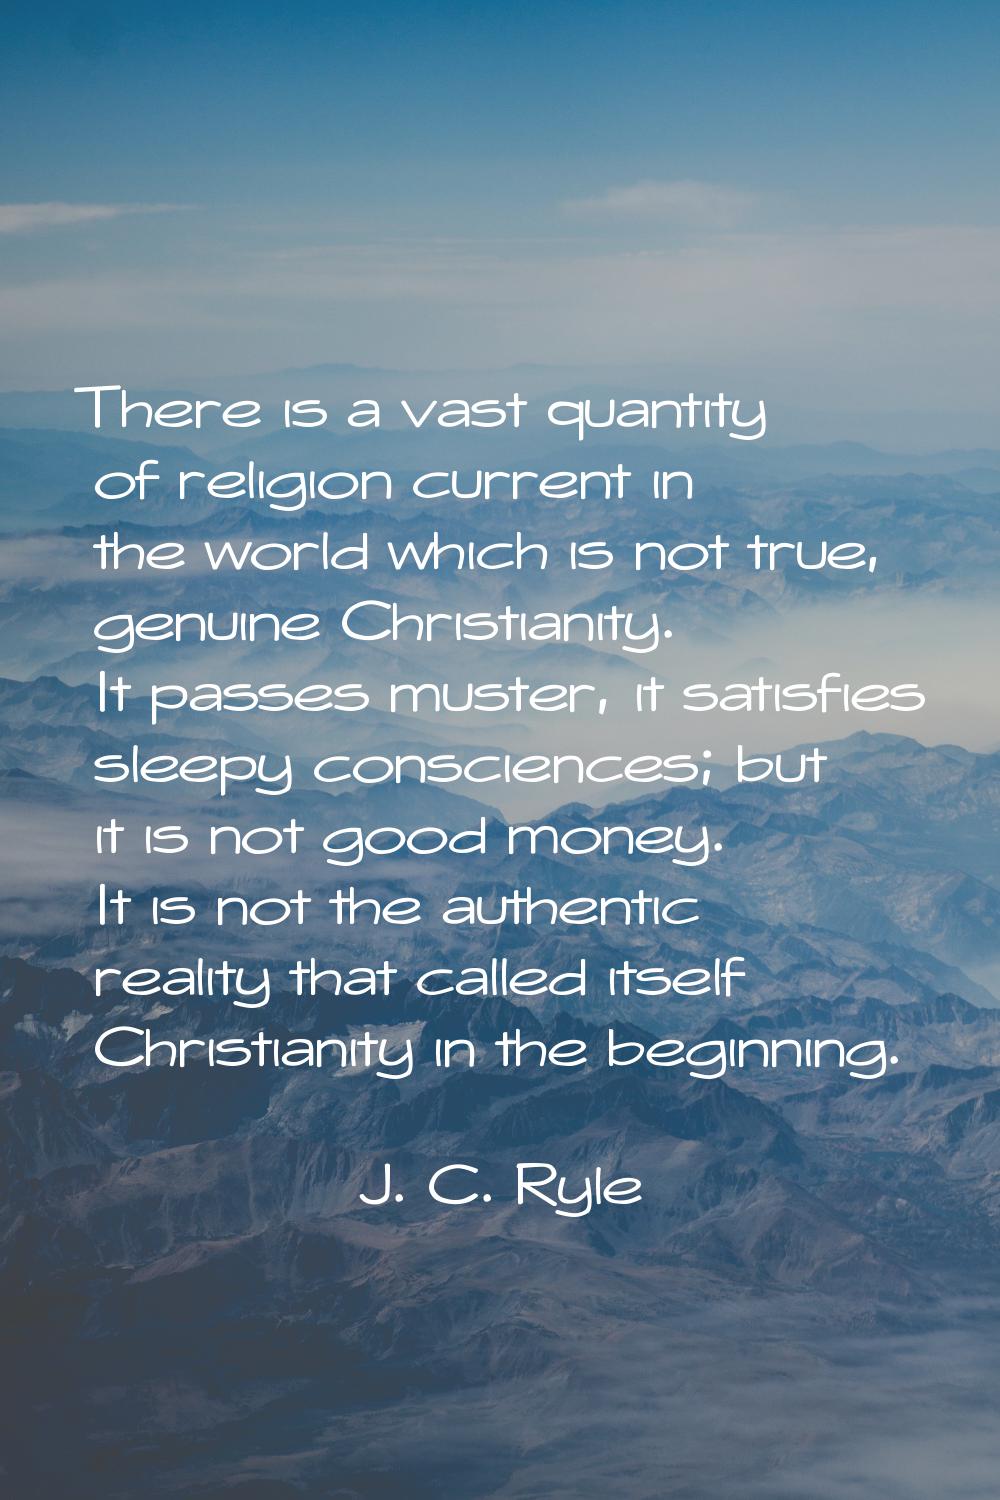 There is a vast quantity of religion current in the world which is not true, genuine Christianity. 